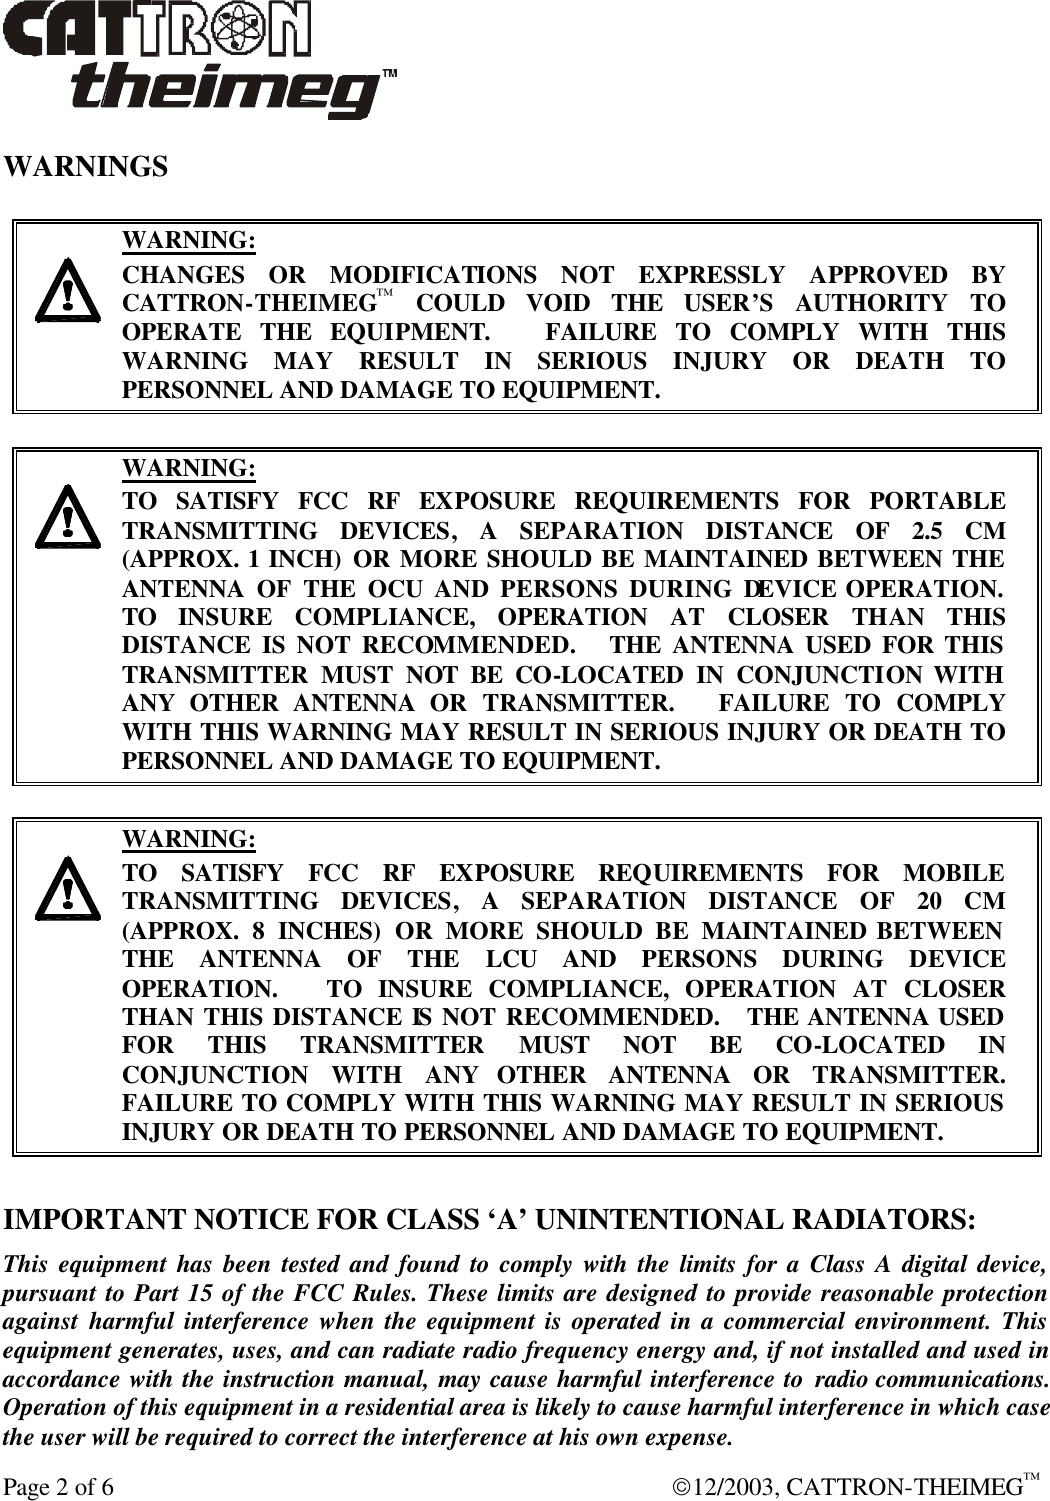  Page 2 of 6  12/2003, CATTRON-THEIMEG™  WARNINGS     WARNING: CHANGES OR MODIFICATIONS NOT EXPRESSLY APPROVED BY CATTRON-THEIMEG™ COULD VOID THE USER’S AUTHORITY TO OPERATE THE EQUIPMENT.   FAILURE TO COMPLY WITH THIS WARNING MAY RESULT IN SERIOUS INJURY OR DEATH TO PERSONNEL AND DAMAGE TO EQUIPMENT.     WARNING: TO SATISFY FCC RF EXPOSURE REQUIREMENTS FOR PORTABLE TRANSMITTING DEVICES, A SEPARATION DISTANCE OF 2.5 CM (APPROX. 1 INCH) OR MORE SHOULD BE MAINTAINED BETWEEN THE ANTENNA OF THE OCU AND PERSONS DURING DEVICE OPERATION. TO  INSURE COMPLIANCE, OPERATION AT CLOSER THAN THIS DISTANCE IS NOT RECOMMENDED.   THE ANTENNA USED FOR THIS TRANSMITTER MUST NOT BE CO-LOCATED IN CONJUNCTION WITH ANY OTHER ANTENNA OR TRANSMITTER.   FAILURE TO COMPLY WITH THIS WARNING MAY RESULT IN SERIOUS INJURY OR DEATH TO PERSONNEL AND DAMAGE TO EQUIPMENT.     WARNING: TO SATISFY FCC RF EXPOSURE REQUIREMENTS FOR MOBILE TRANSMITTING DEVICES, A SEPARATION DISTANCE OF 20 CM (APPROX. 8 INCHES) OR MORE SHOULD BE MAINTAINED BETWEEN THE ANTENNA OF THE LCU  AND PERSONS DURING DEVICE OPERATION.    TO  INSURE COMPLIANCE, OPERATION AT CLOSER THAN THIS DISTANCE IS NOT RECOMMENDED.   THE ANTENNA USED FOR THIS TRANSMITTER MUST NOT BE CO-LOCATED IN CONJUNCTION WITH ANY OTHER ANTENNA OR TRANSMITTER.   FAILURE TO COMPLY WITH THIS WARNING MAY RESULT IN SERIOUS INJURY OR DEATH TO PERSONNEL AND DAMAGE TO EQUIPMENT.  IMPORTANT NOTICE FOR CLASS ‘A’ UNINTENTIONAL RADIATORS: This equipment has been tested and found to comply with the limits for a Class A digital device, pursuant to Part 15 of the FCC Rules. These limits are designed to provide reasonable protection against harmful interference when the equipment is operated in a commercial environment. This equipment generates, uses, and can radiate radio frequency energy and, if not installed and used in accordance with the instruction manual, may cause harmful interference to radio communications. Operation of this equipment in a residential area is likely to cause harmful interference in which case the user will be required to correct the interference at his own expense. 